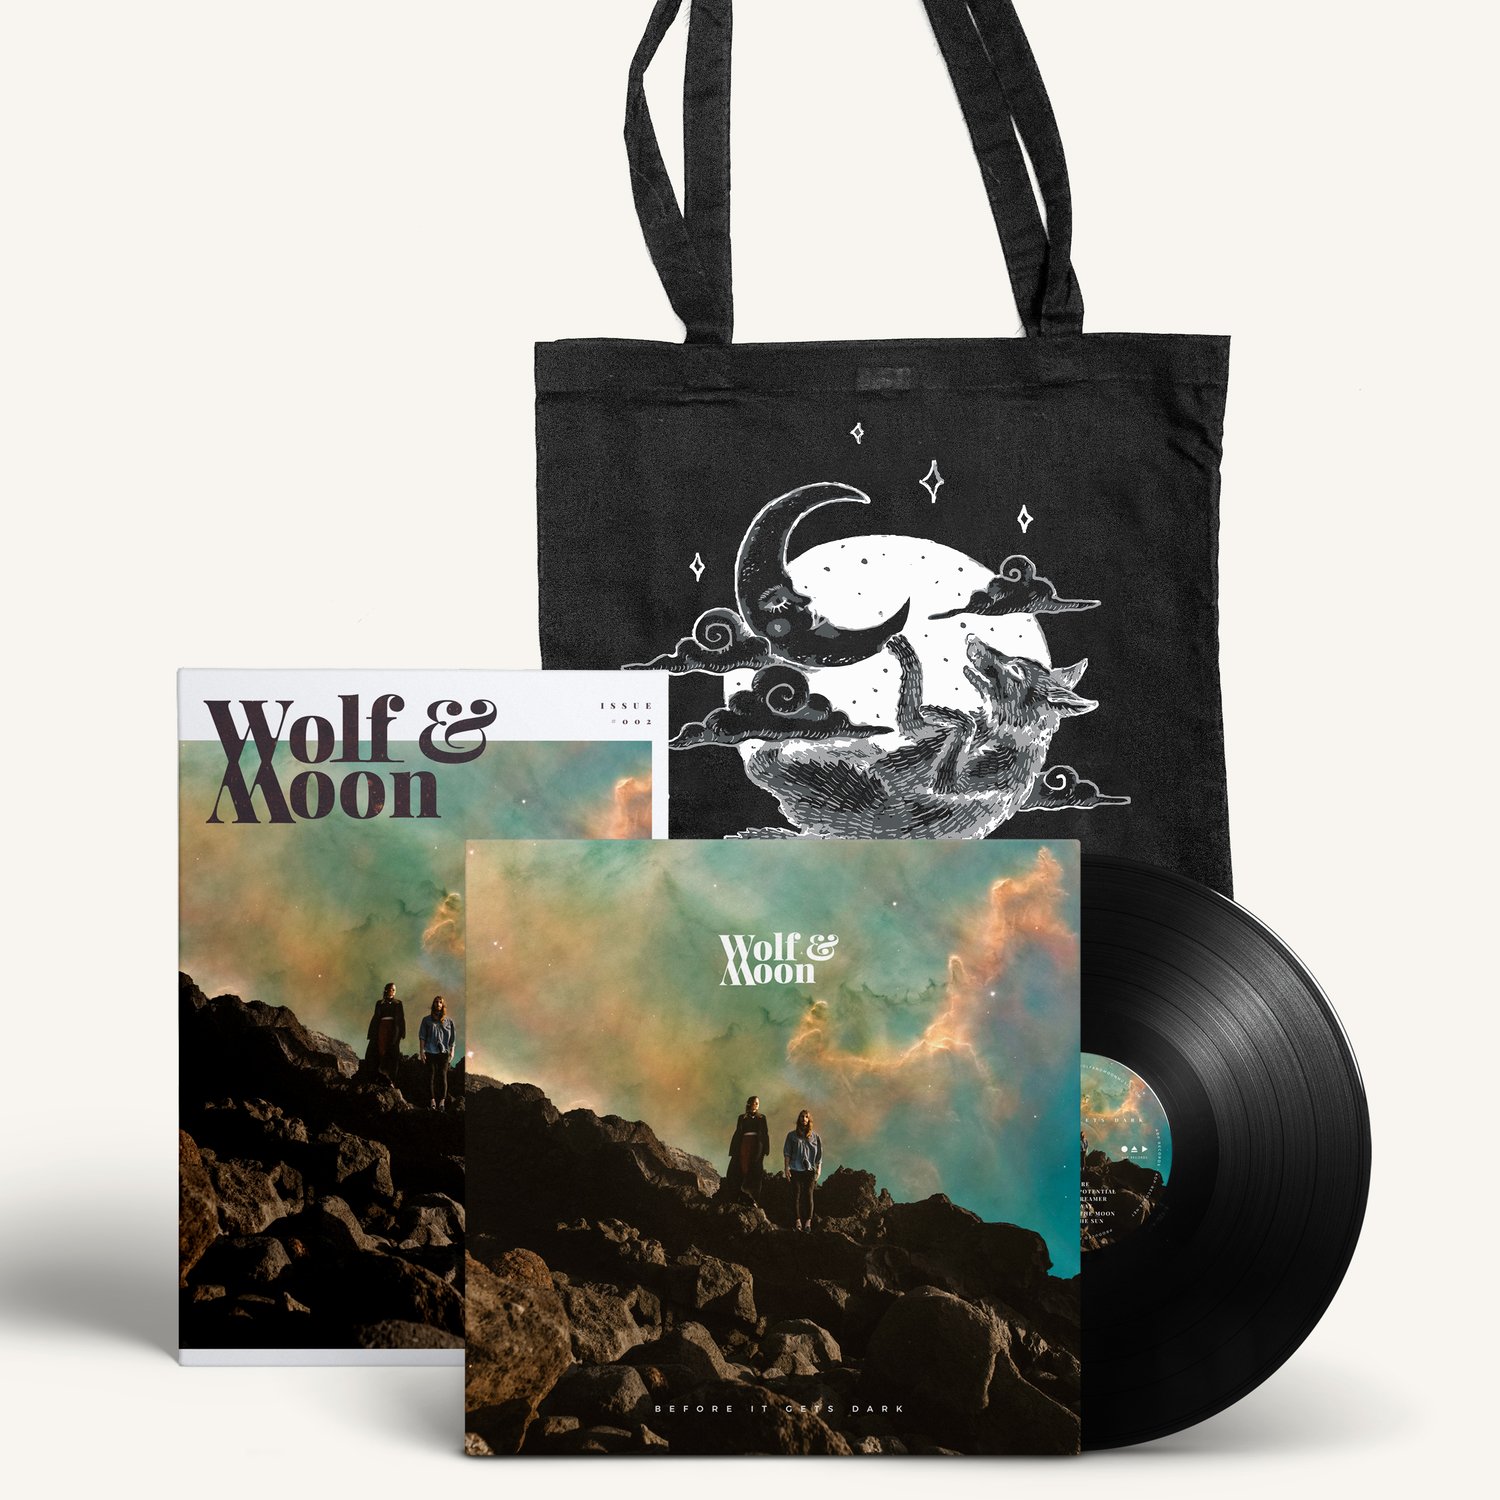 Image of Before It Gets Dark - Vinyl, a Mag in a Bag